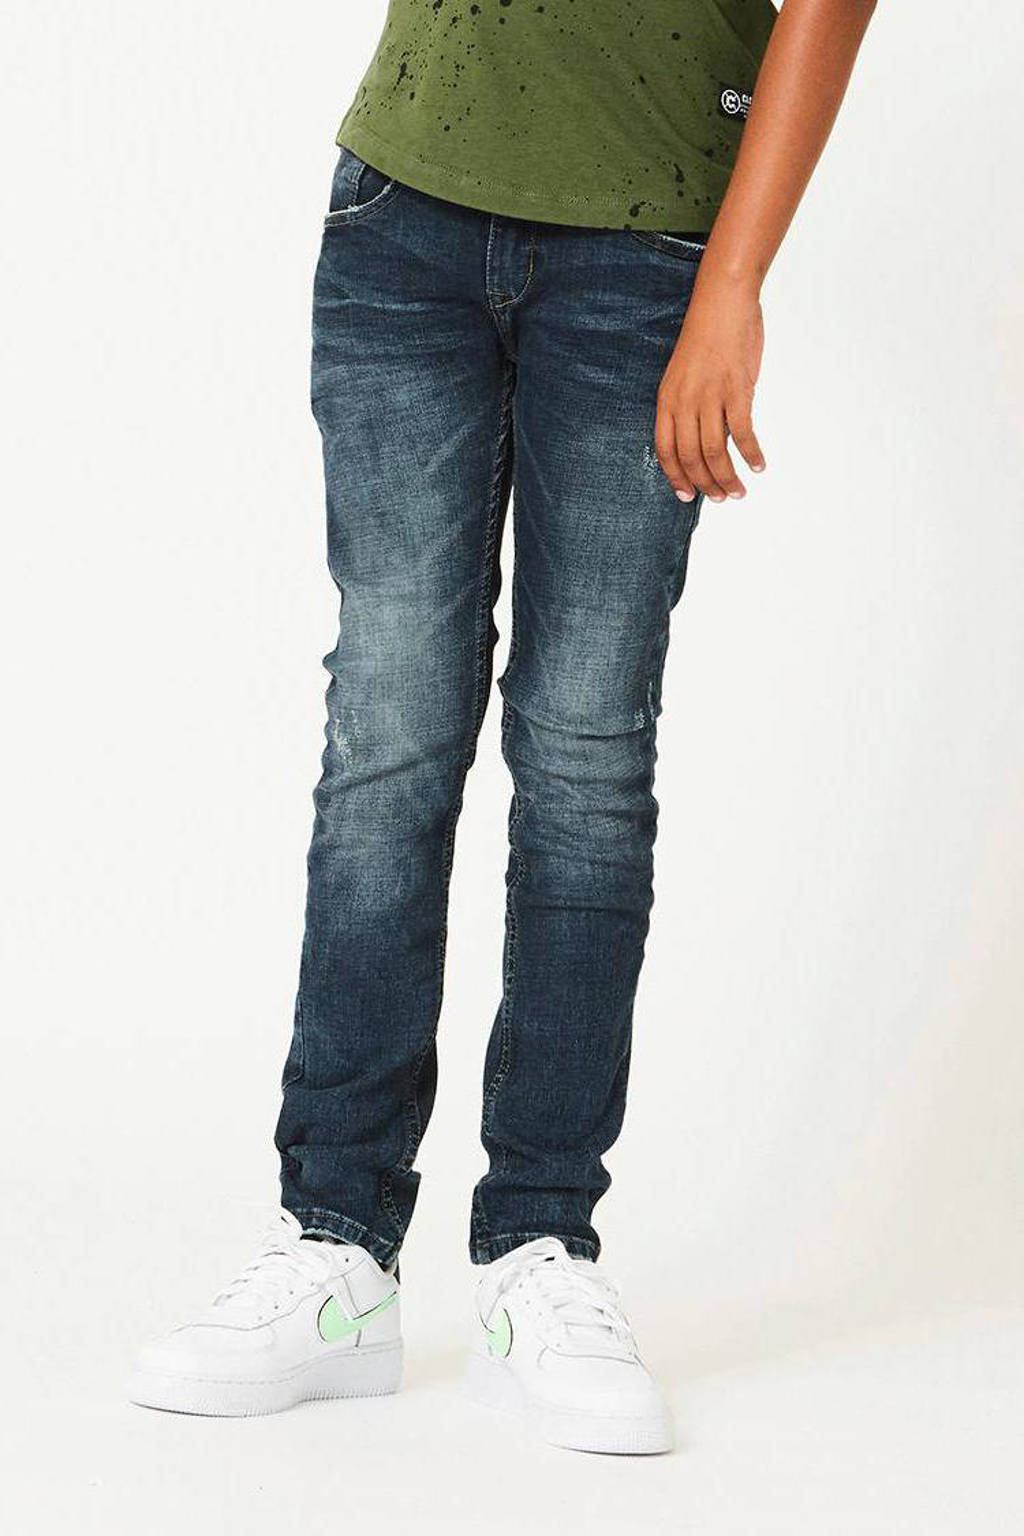 CoolCat Junior slim fit jeans Kevin donkerblauw